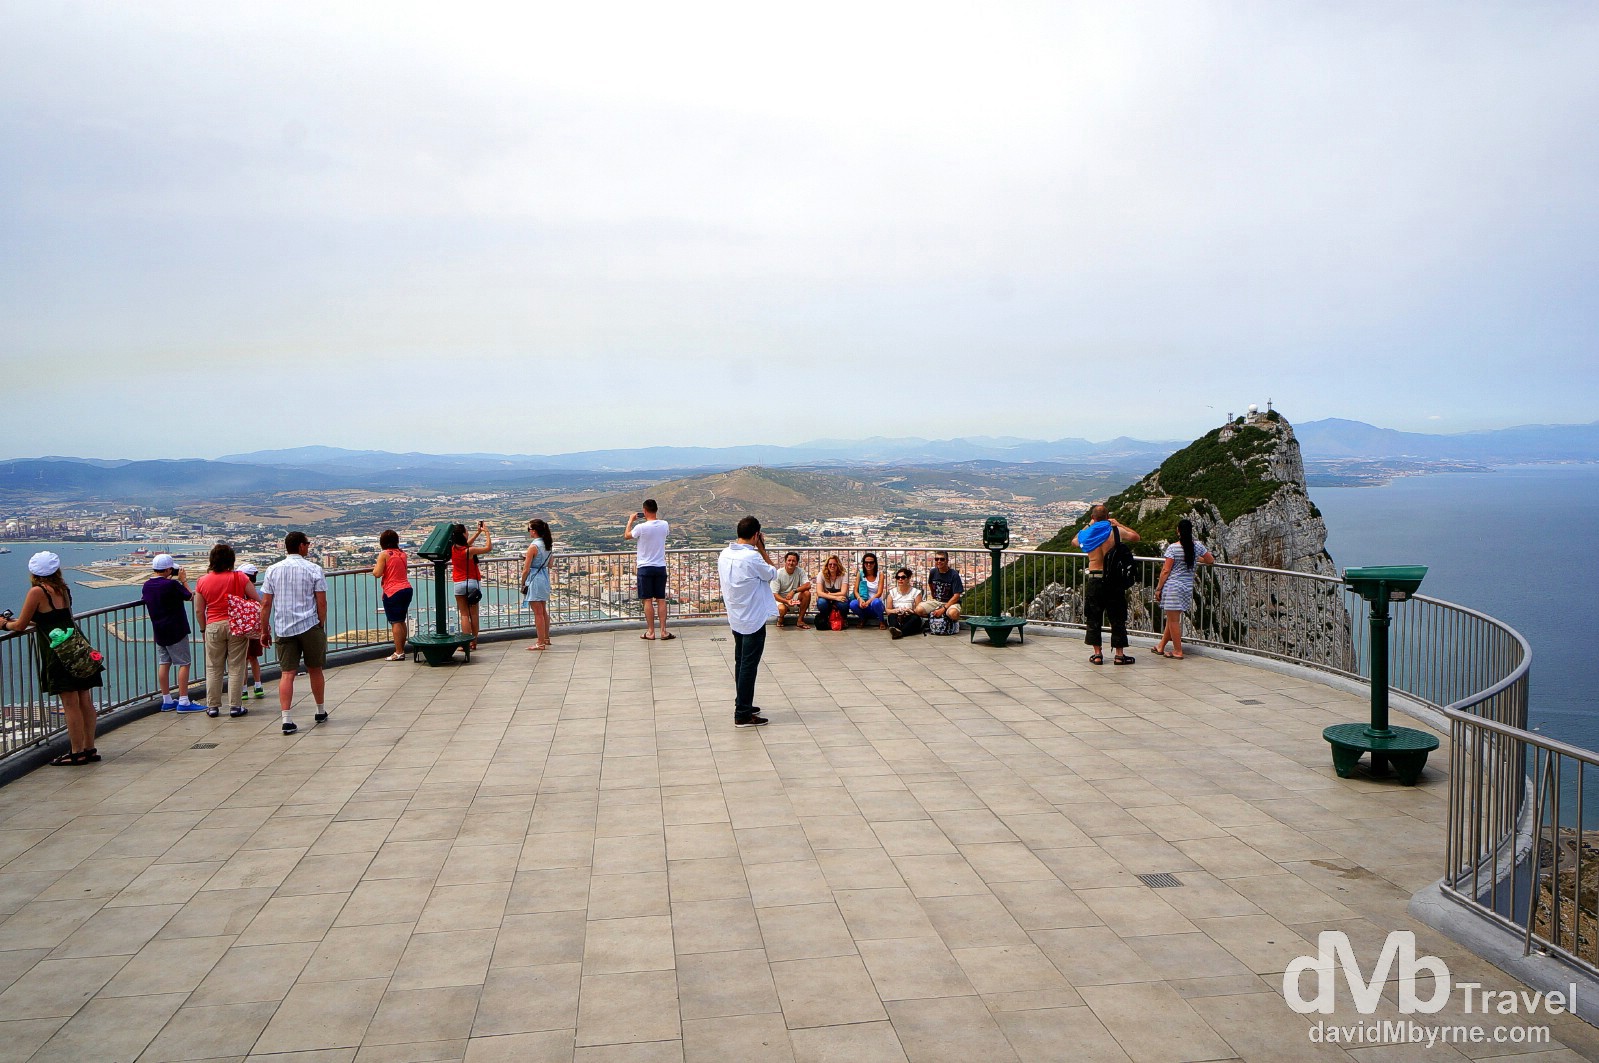 People on The Top of the Rock viewing deck in The Upper Rock Nature Reserve, Gibraltar. June 5th, 2014.